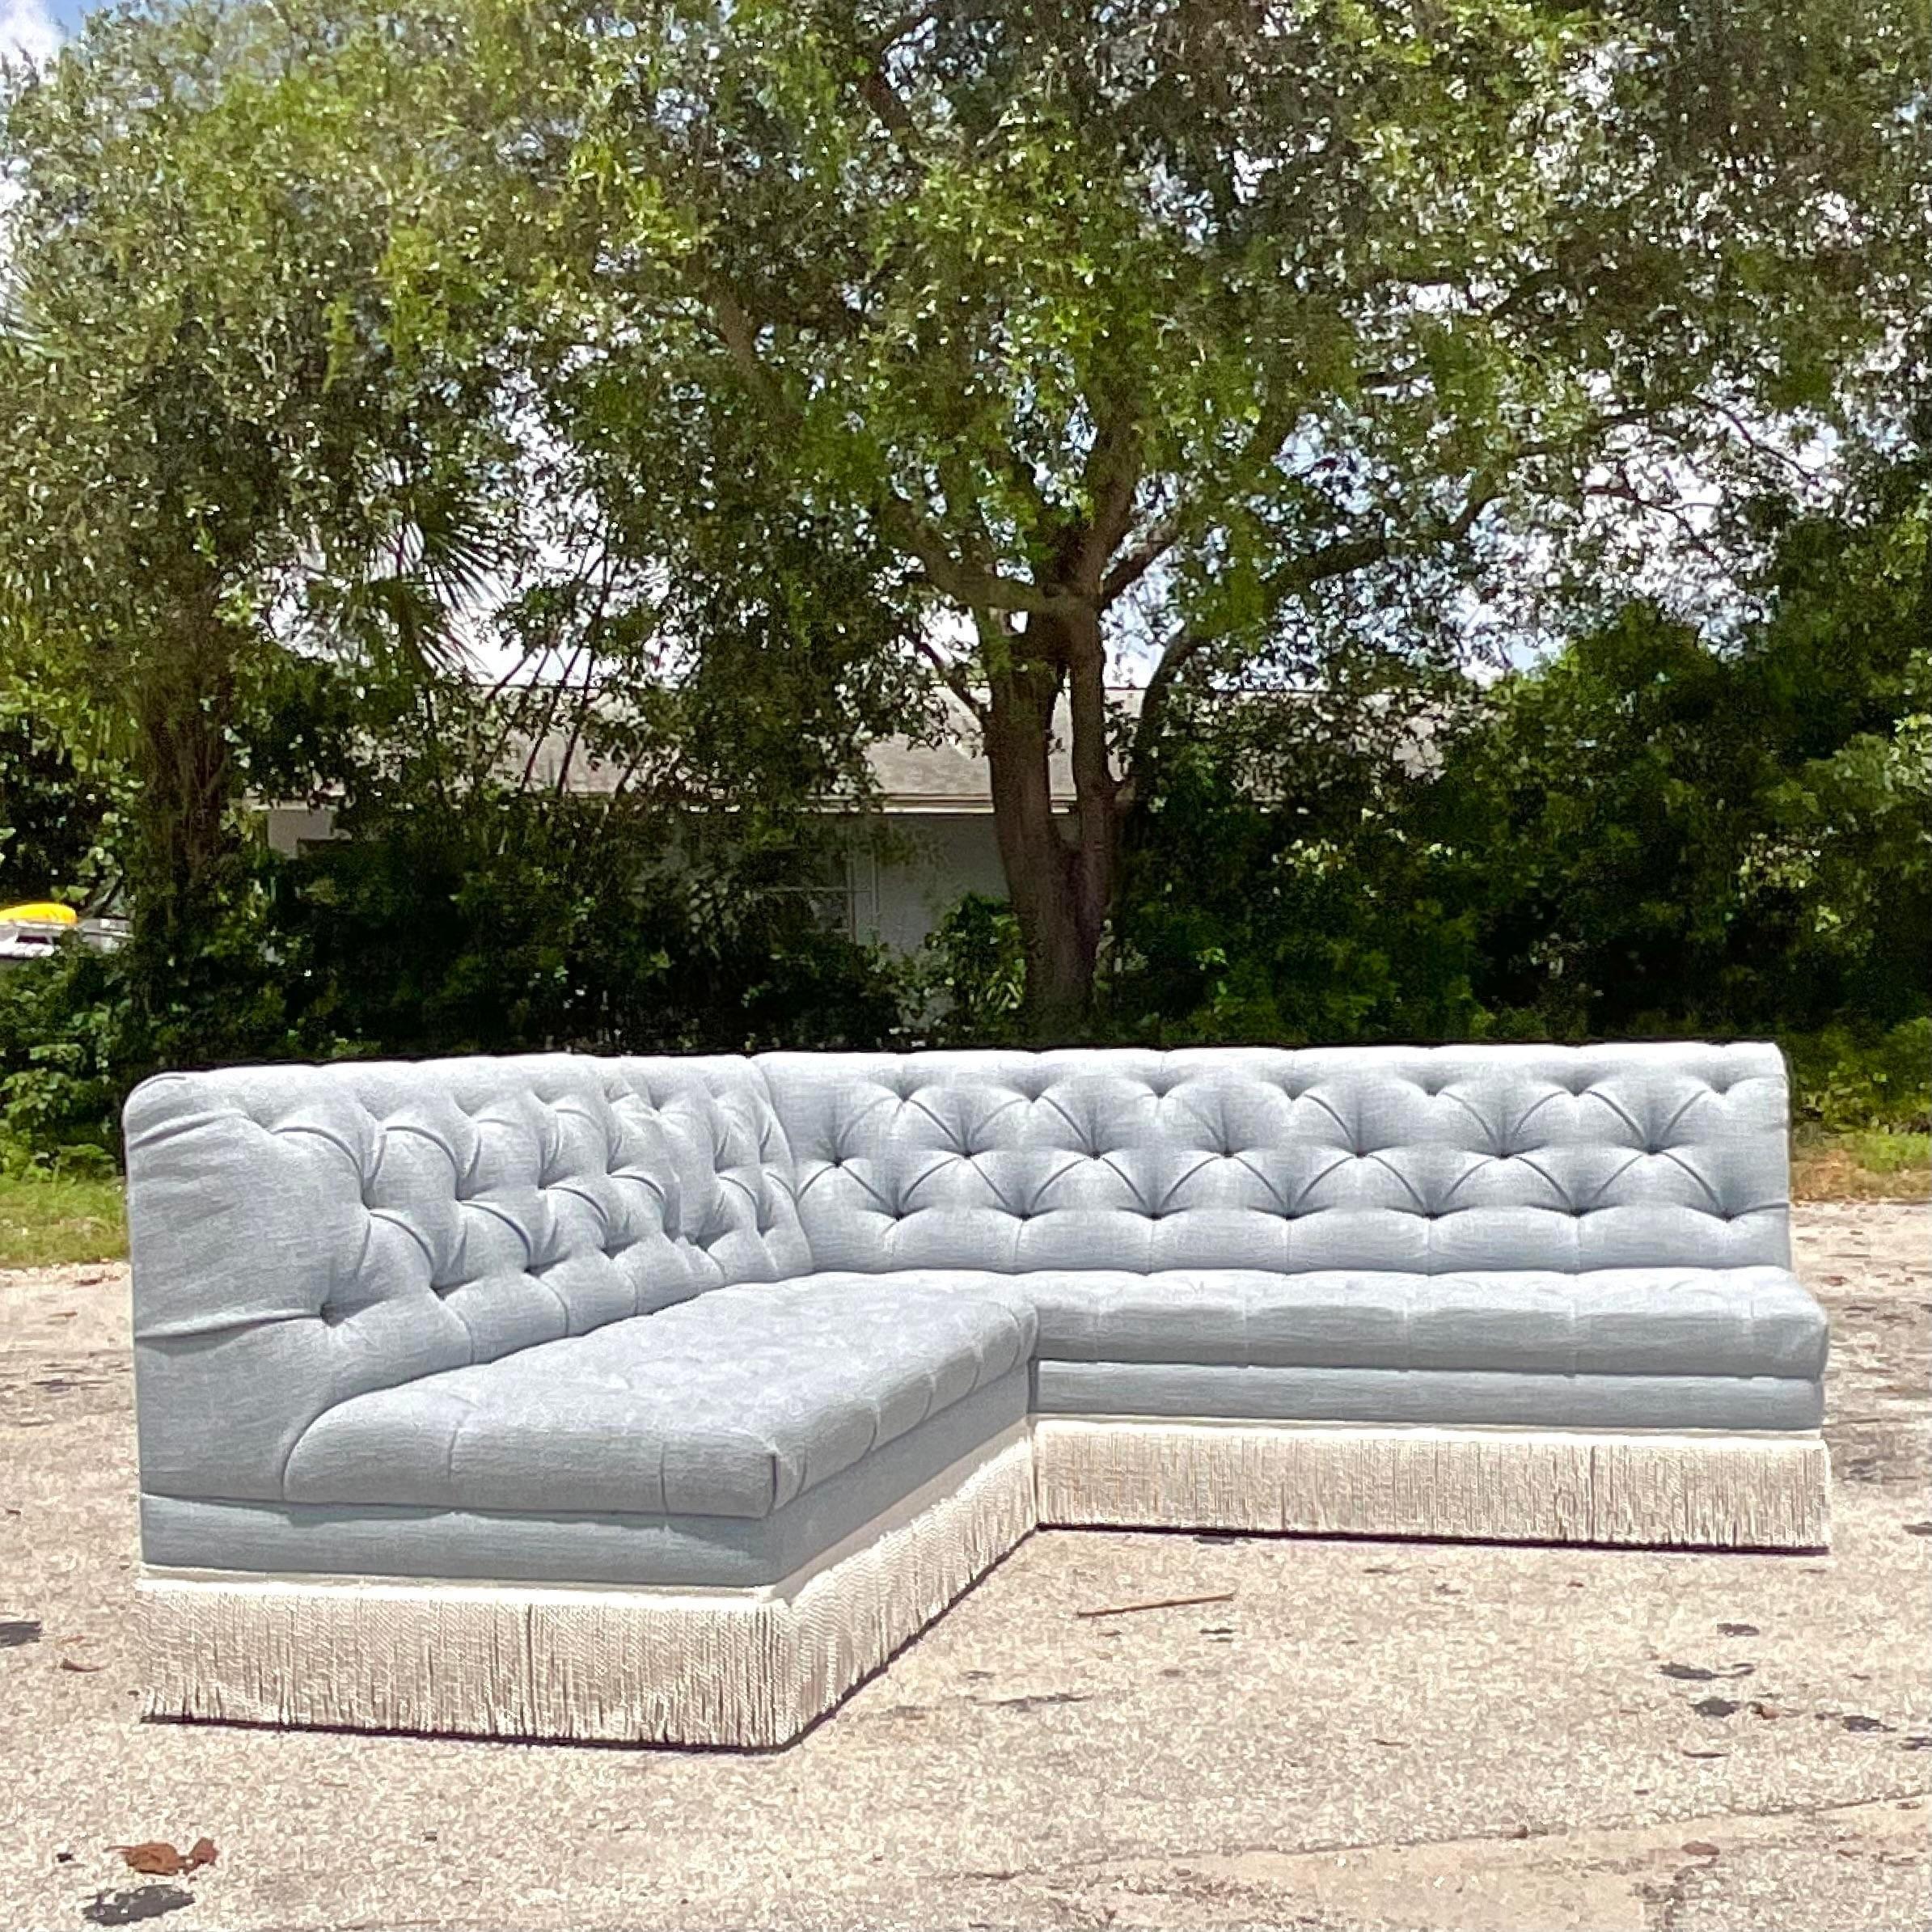 American Vintage Custom Boho O'Henry Tufted Banquette Sectional Sofa For Sale